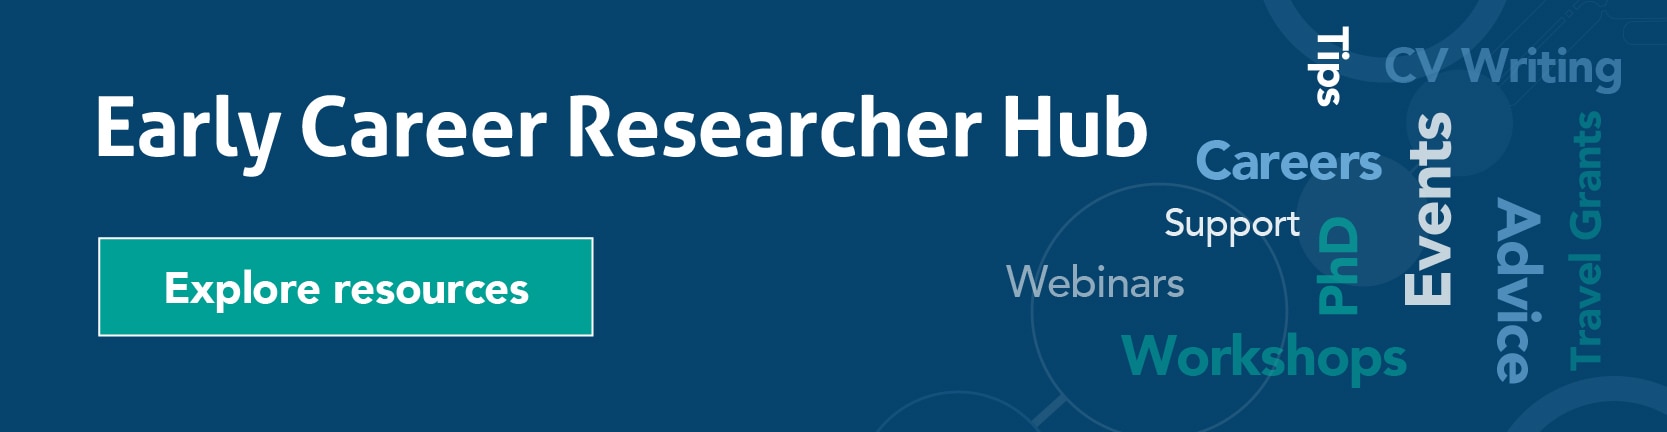 Proteintech Early Career Research Hub banner